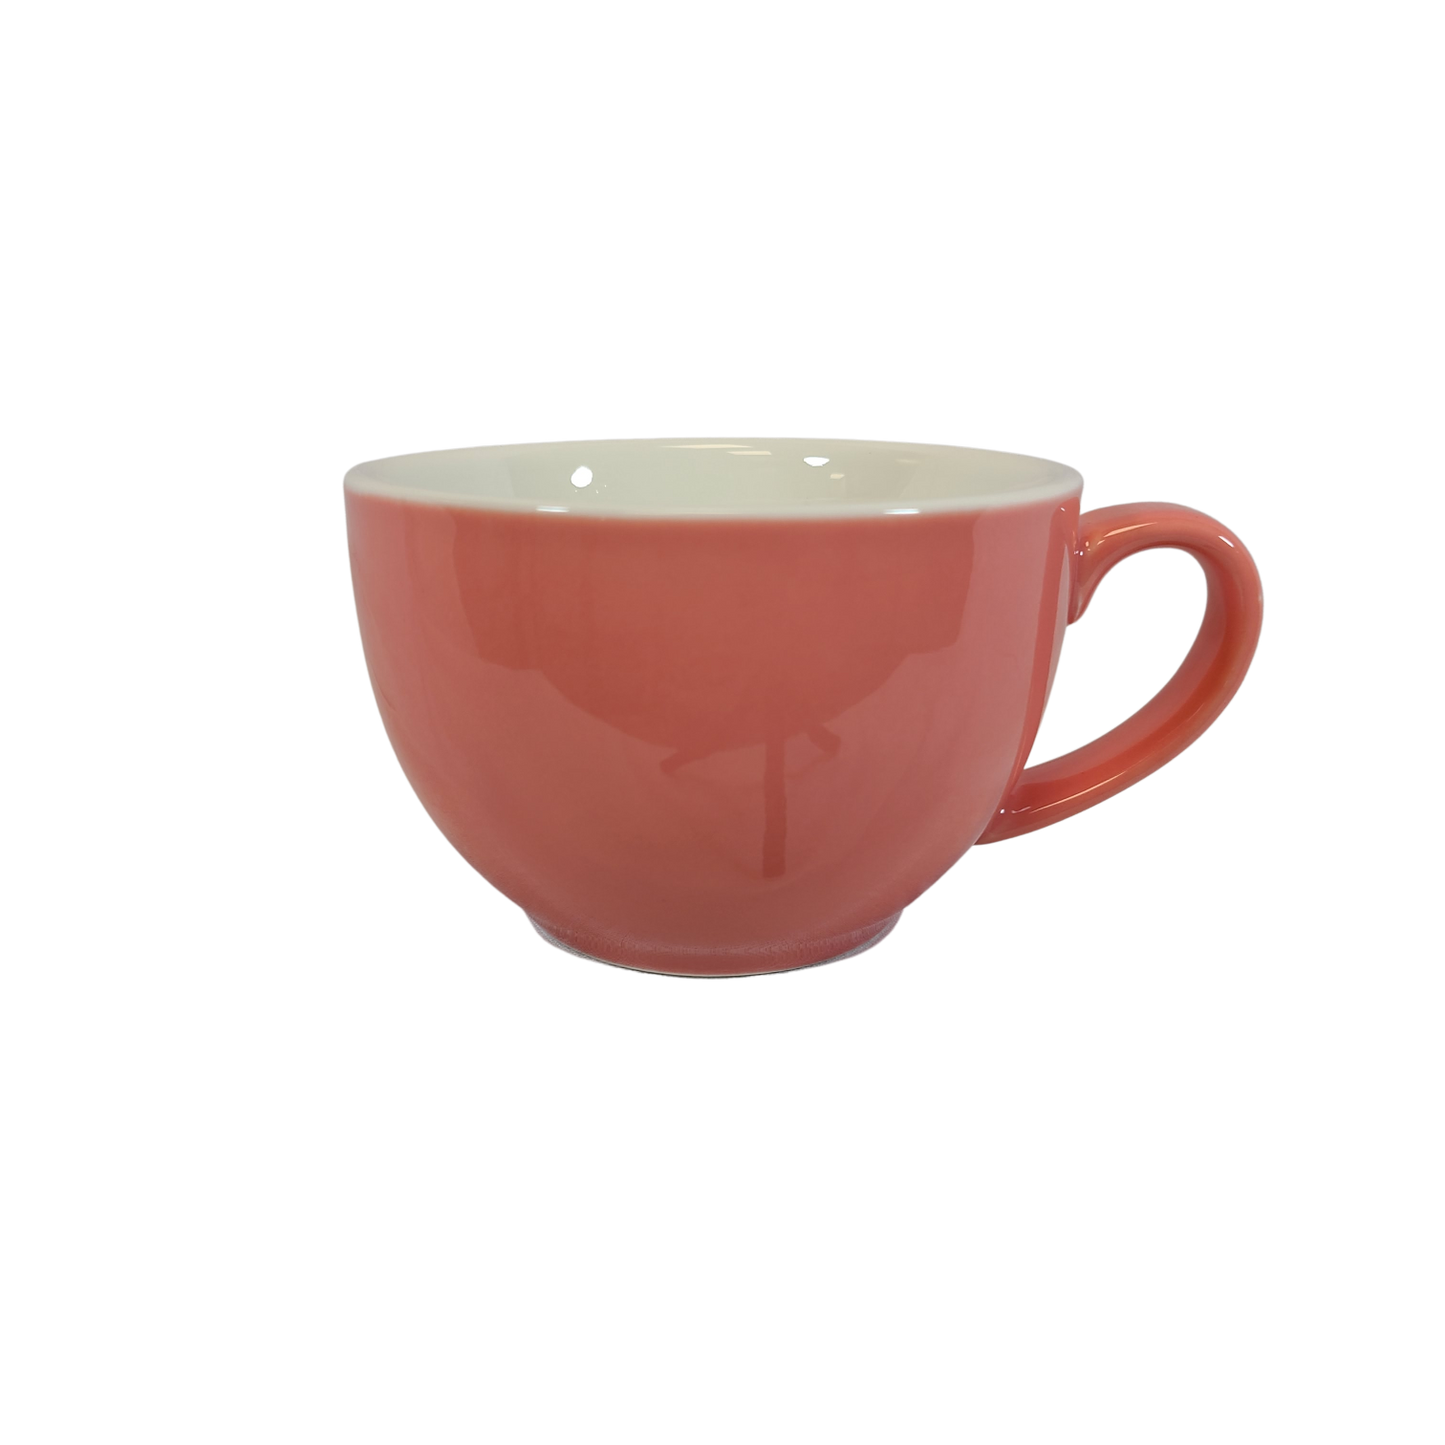 Coffee Addicts commercial ceramic cup in glossy pink latte cup 12oz 350ml